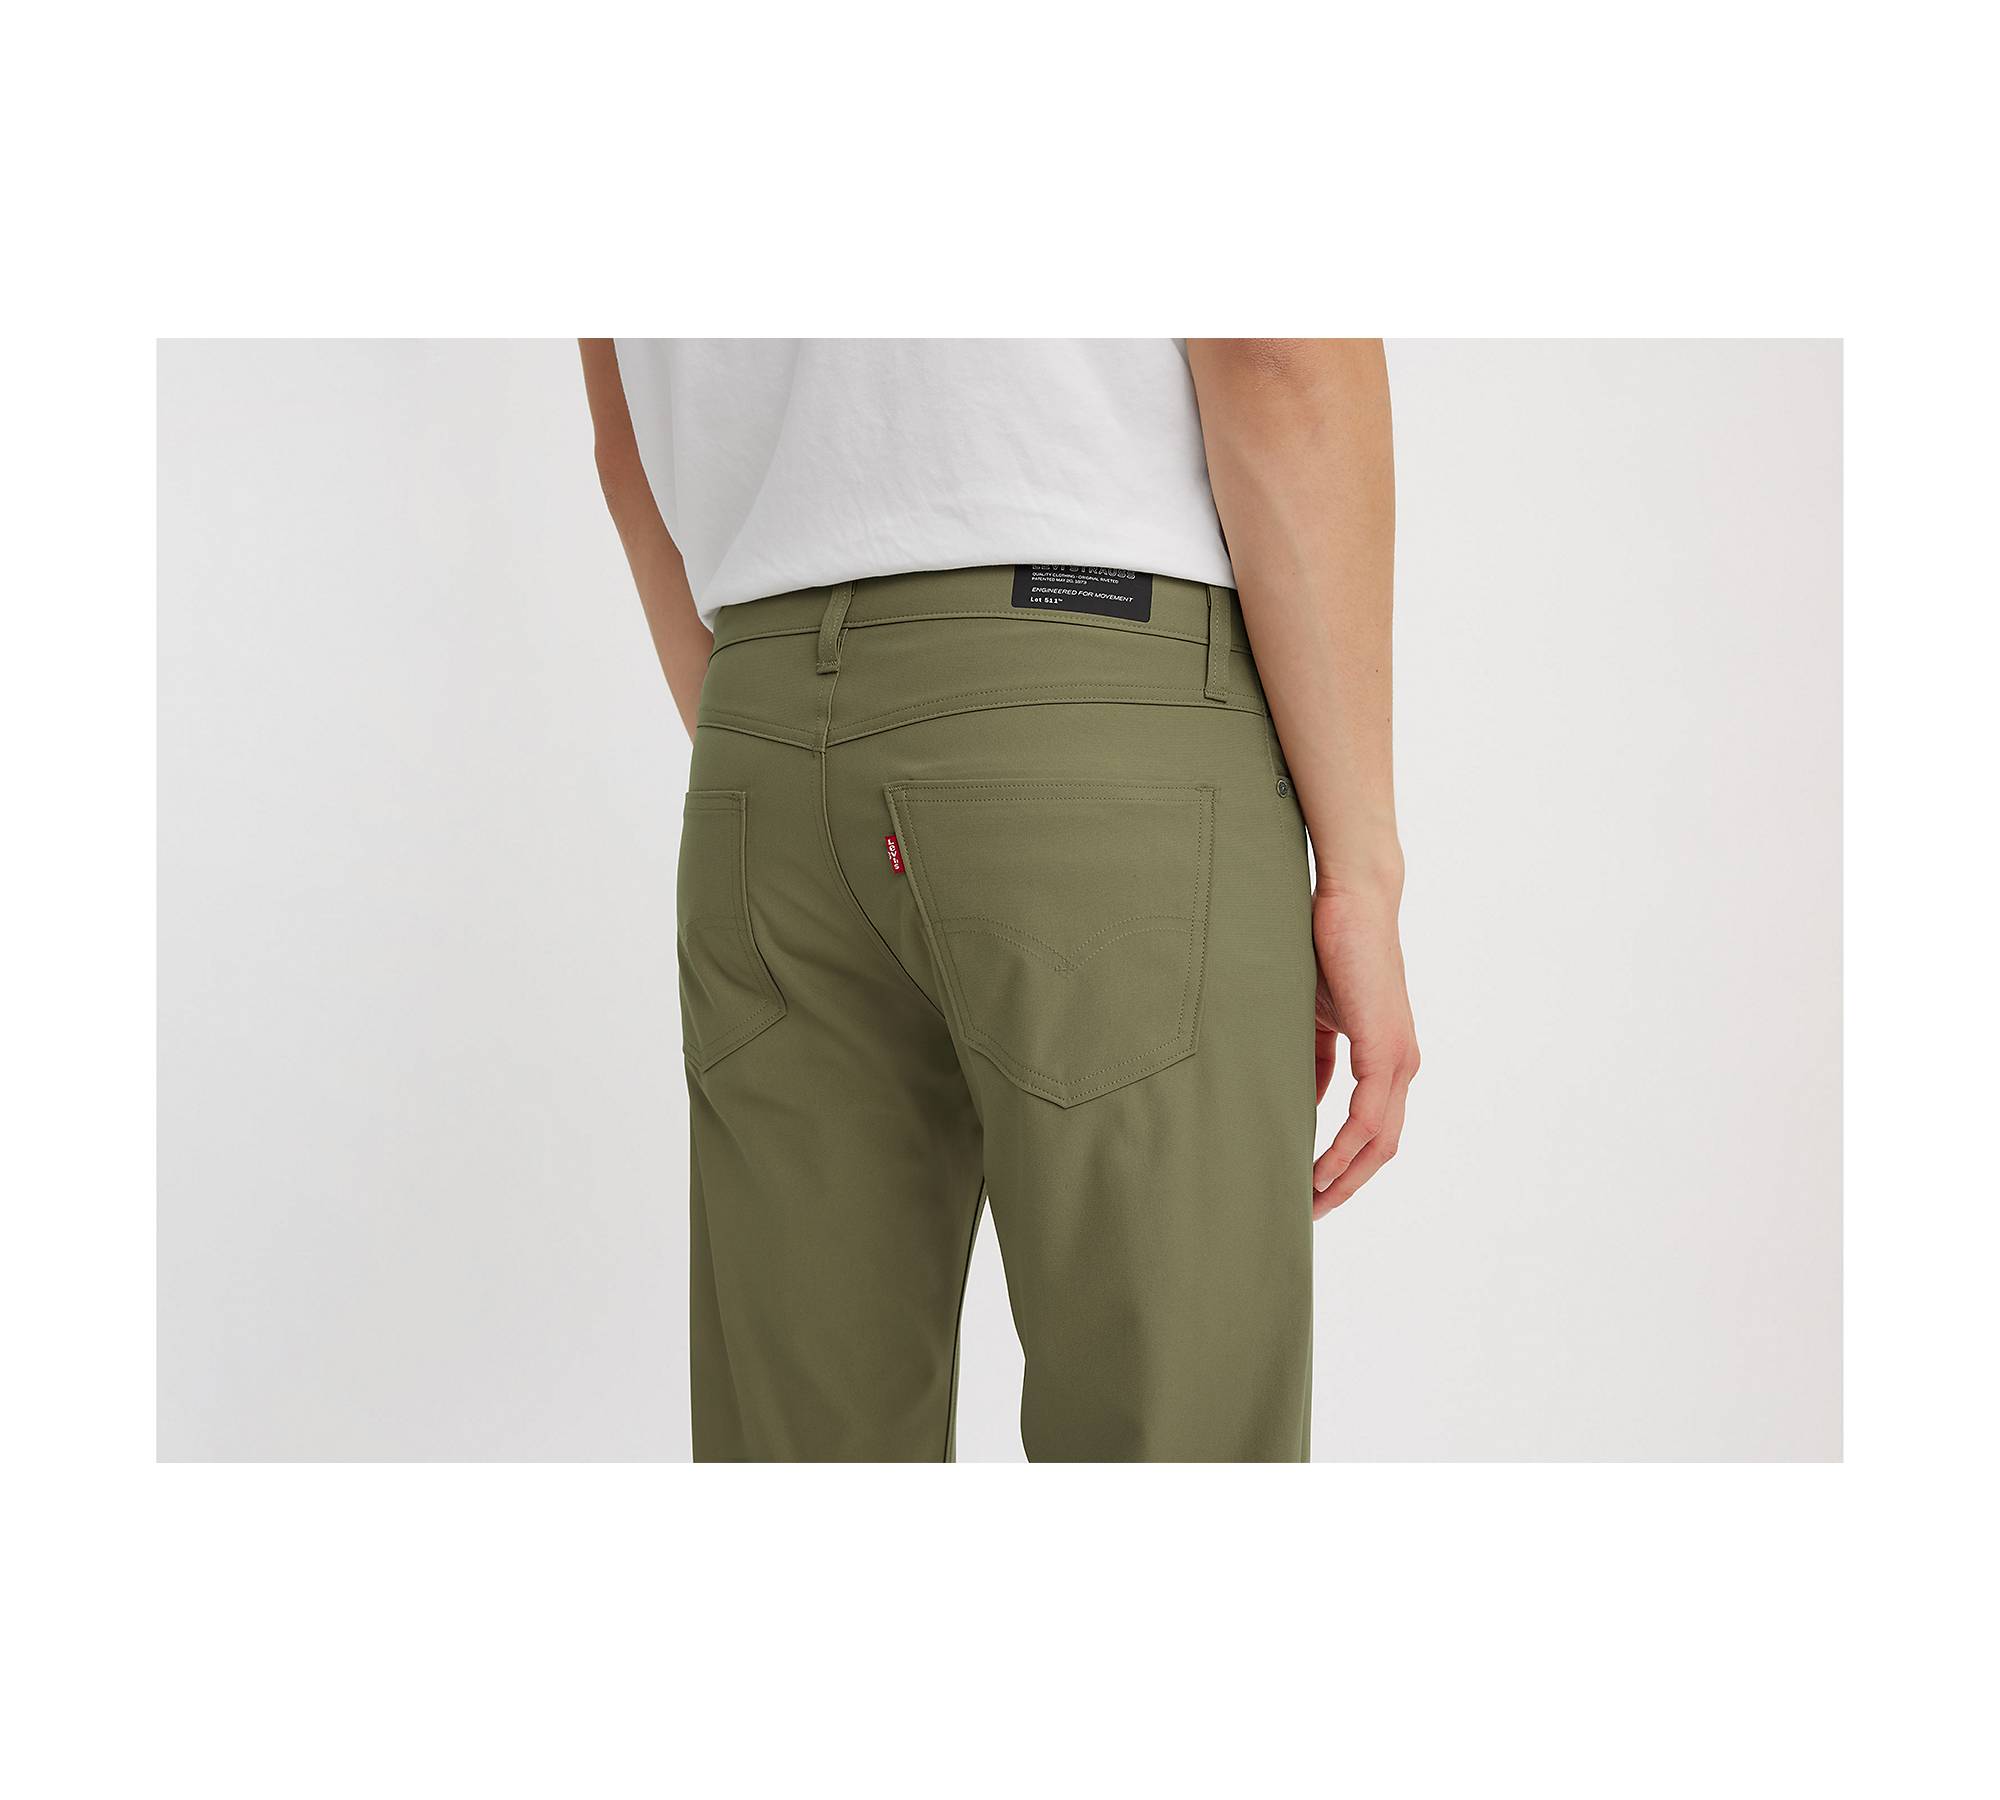 Khaki Pants With Pockets On The Side Best Sale, SAVE 48% 